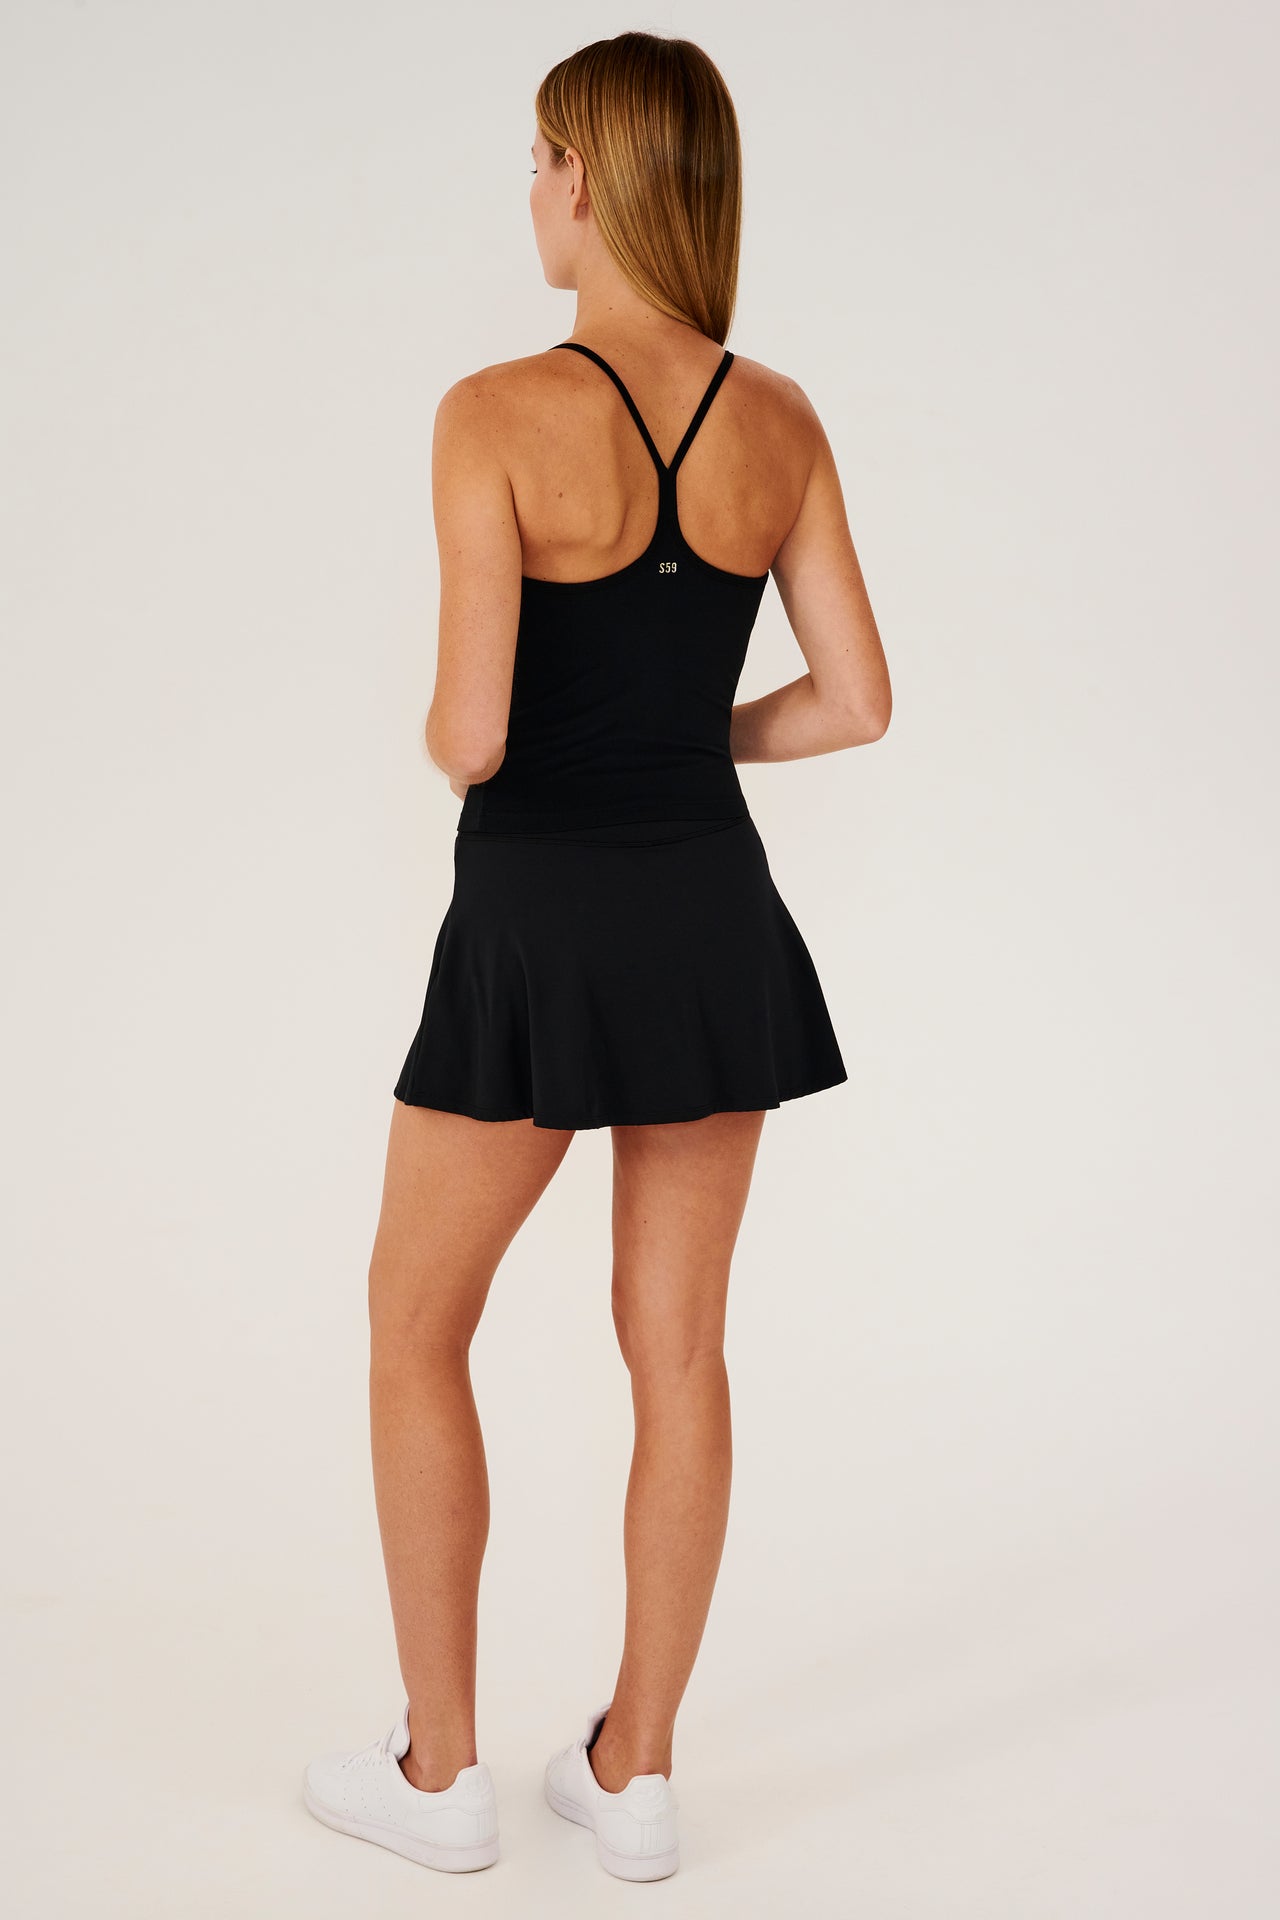 Full back view of girl wearing black upper thigh skirt with built in shorts, black tank top and white shoes